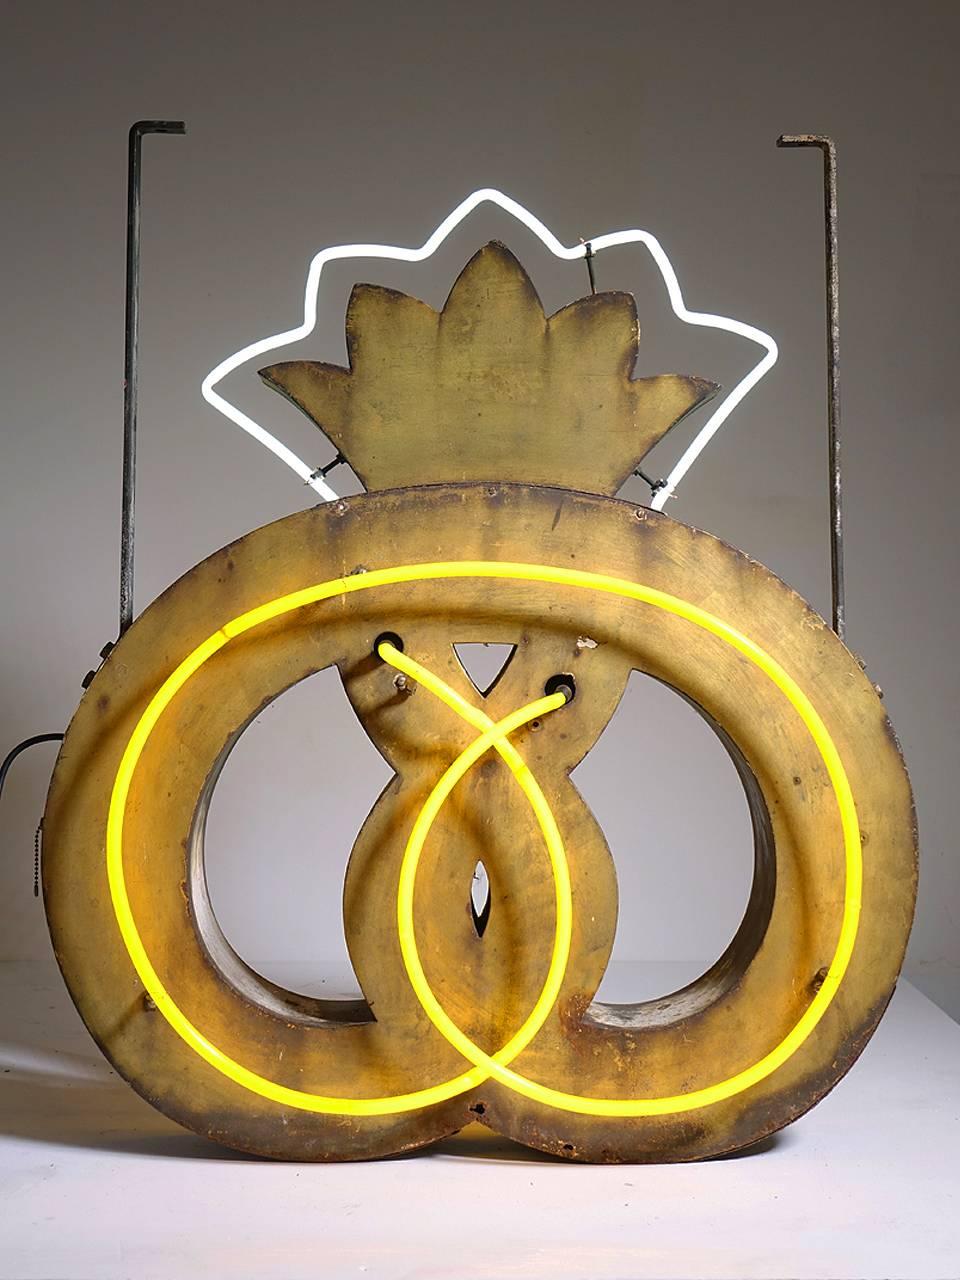 When we first found this neon sign our restorer was excited to work on it. He believes that the sign was a handmade and one-off being produced by a skilled metal fabricator. It was most likely used outside a small shop in Denmark. This is a